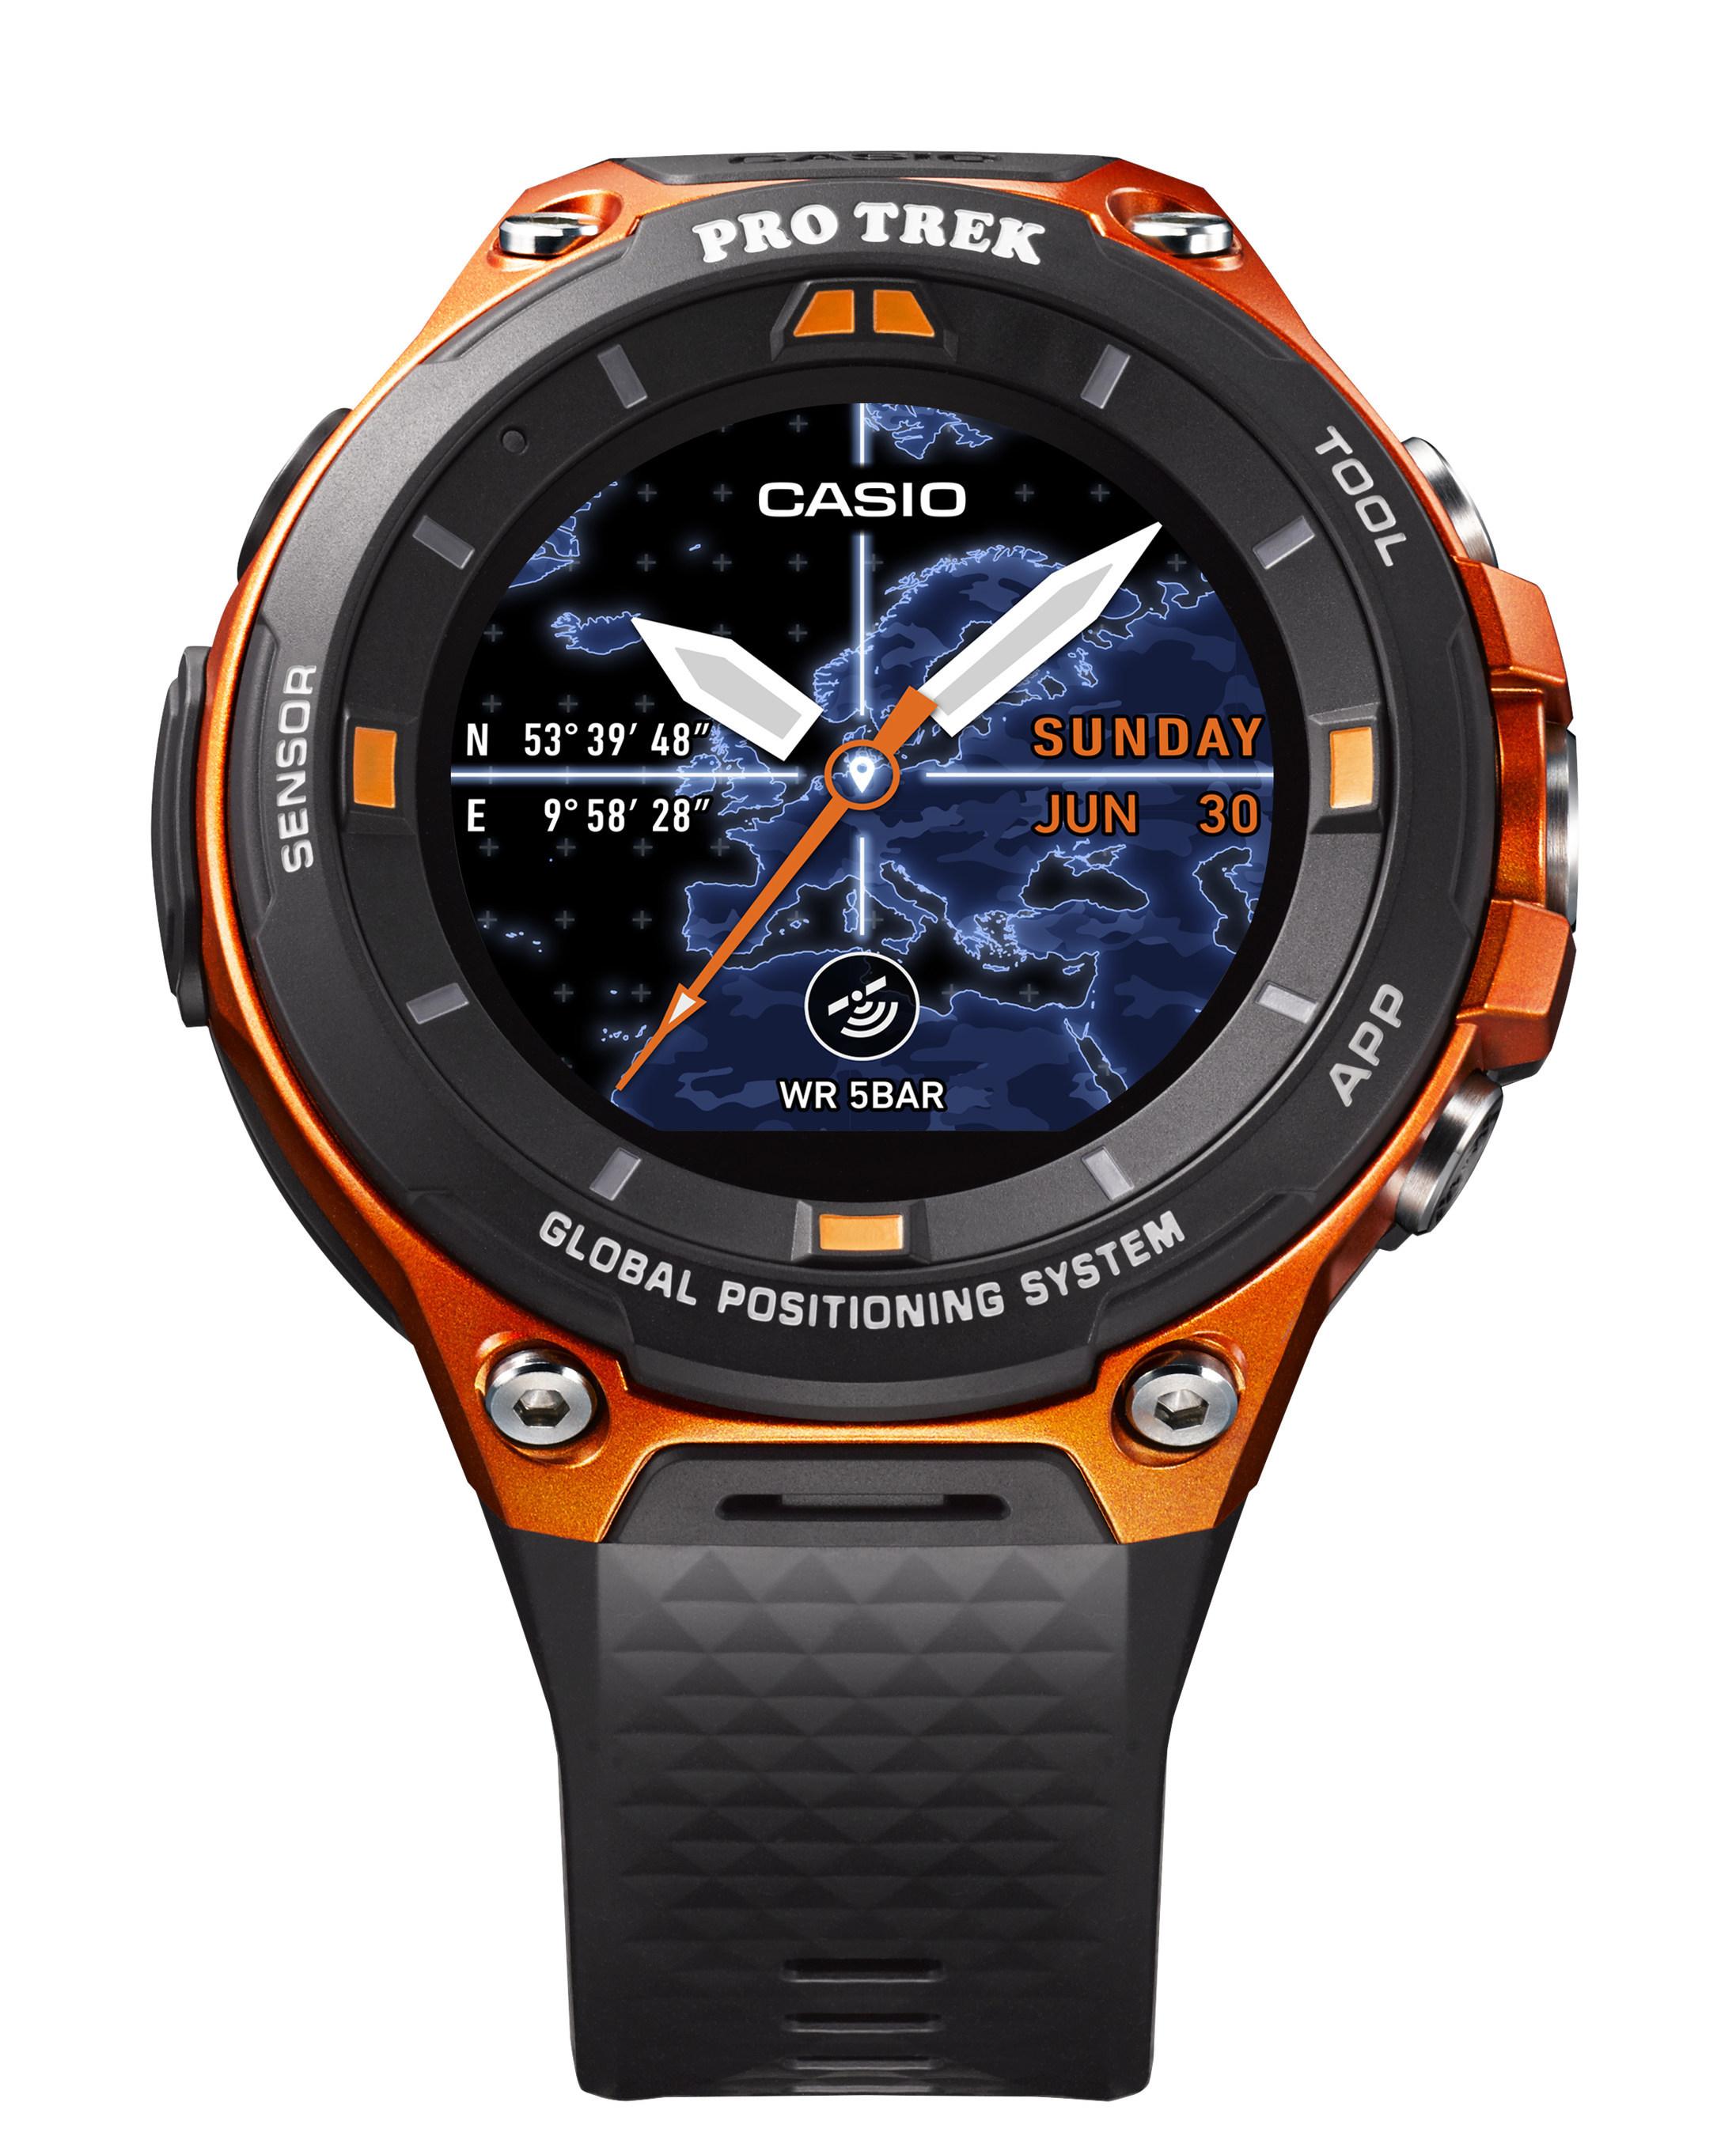 Casio To Release Second New Smart Outdoor Watch With GPS To Inspire